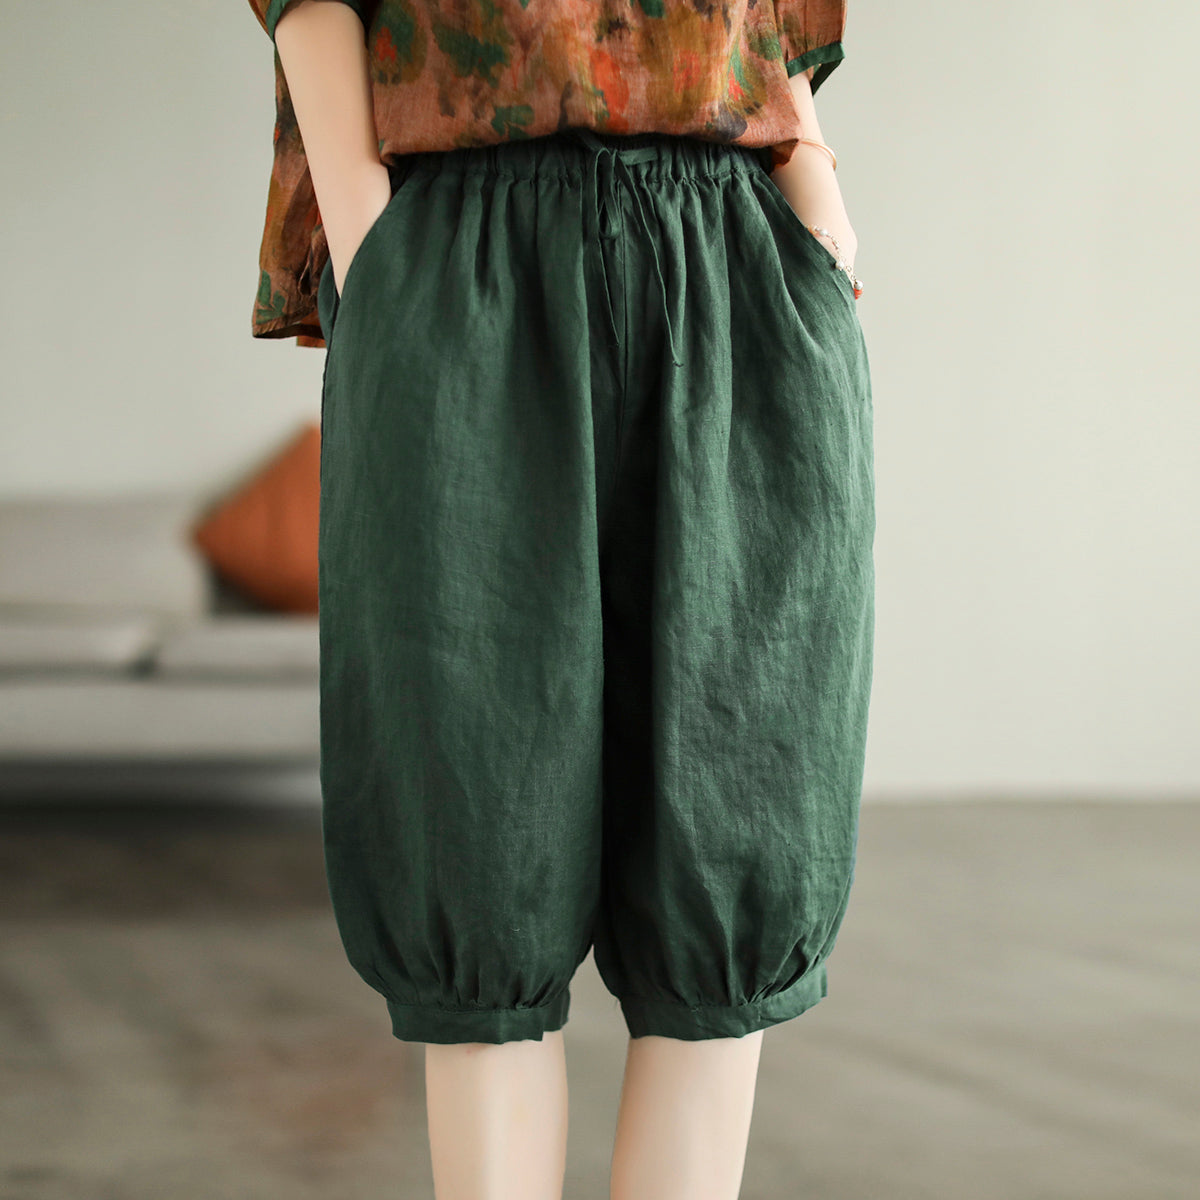 Women Knee Height Summer Solid Linen Casual Shorts Jul 2022 New Arrival One Size Green 